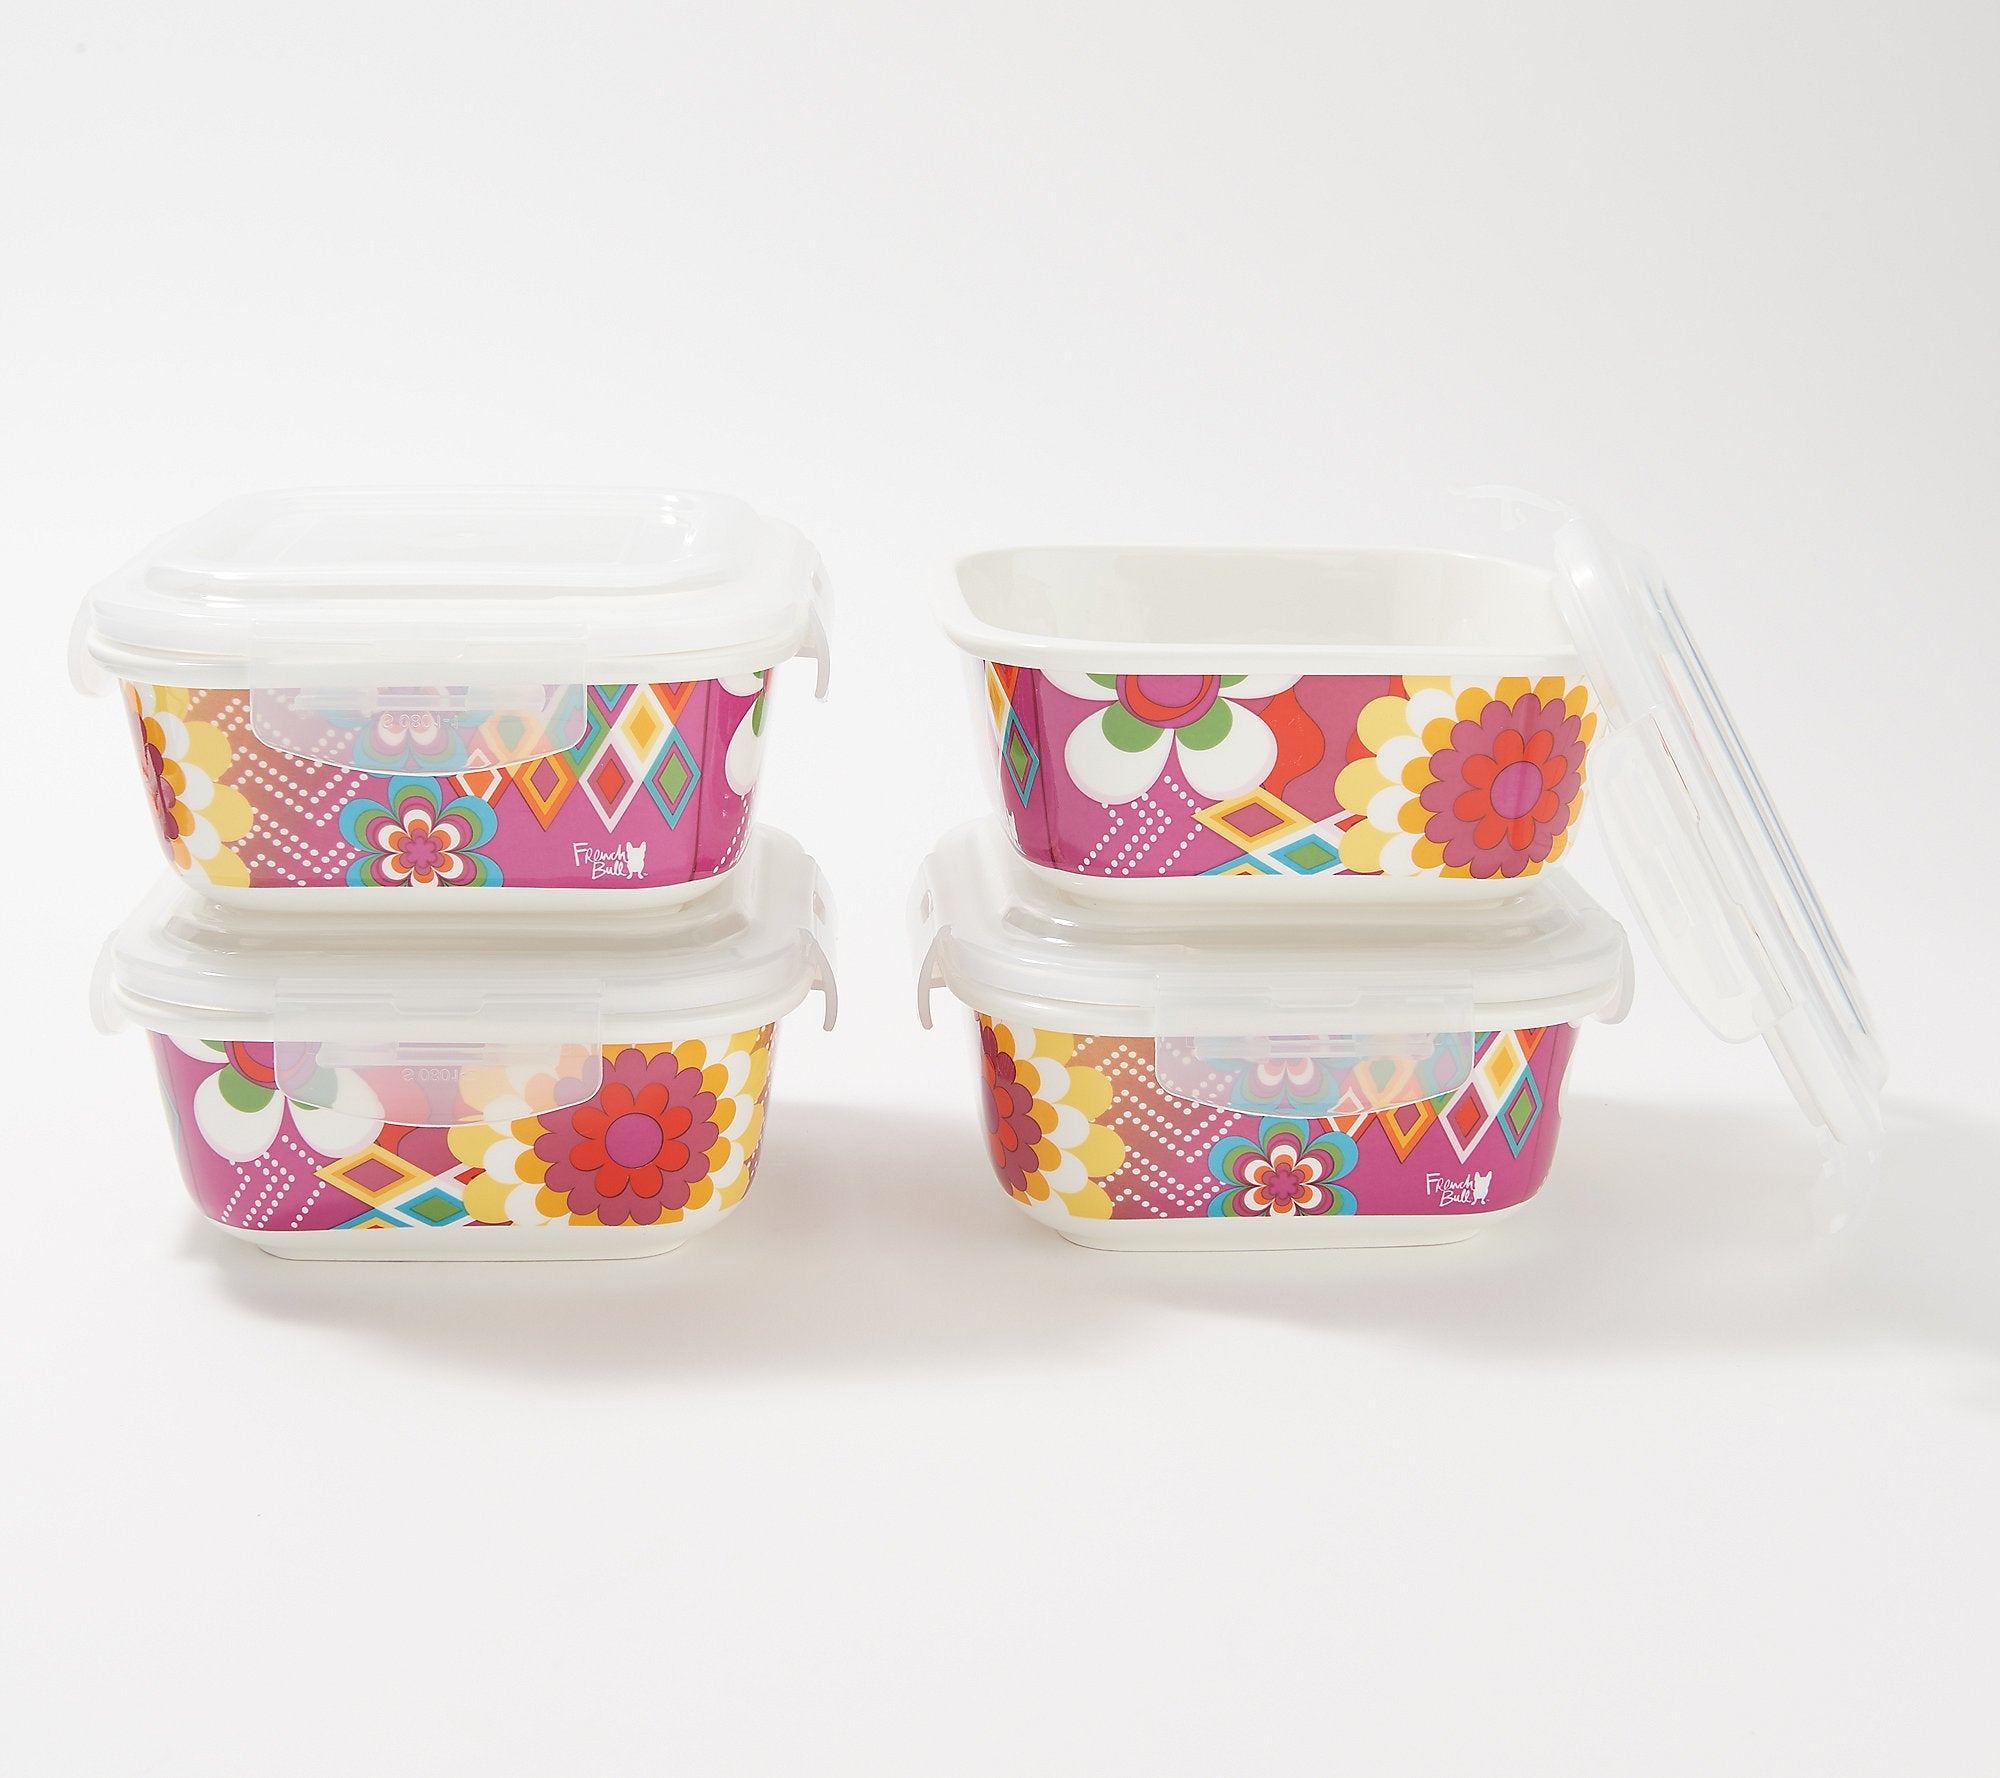 Neoflam's Porcelain Storage Containers